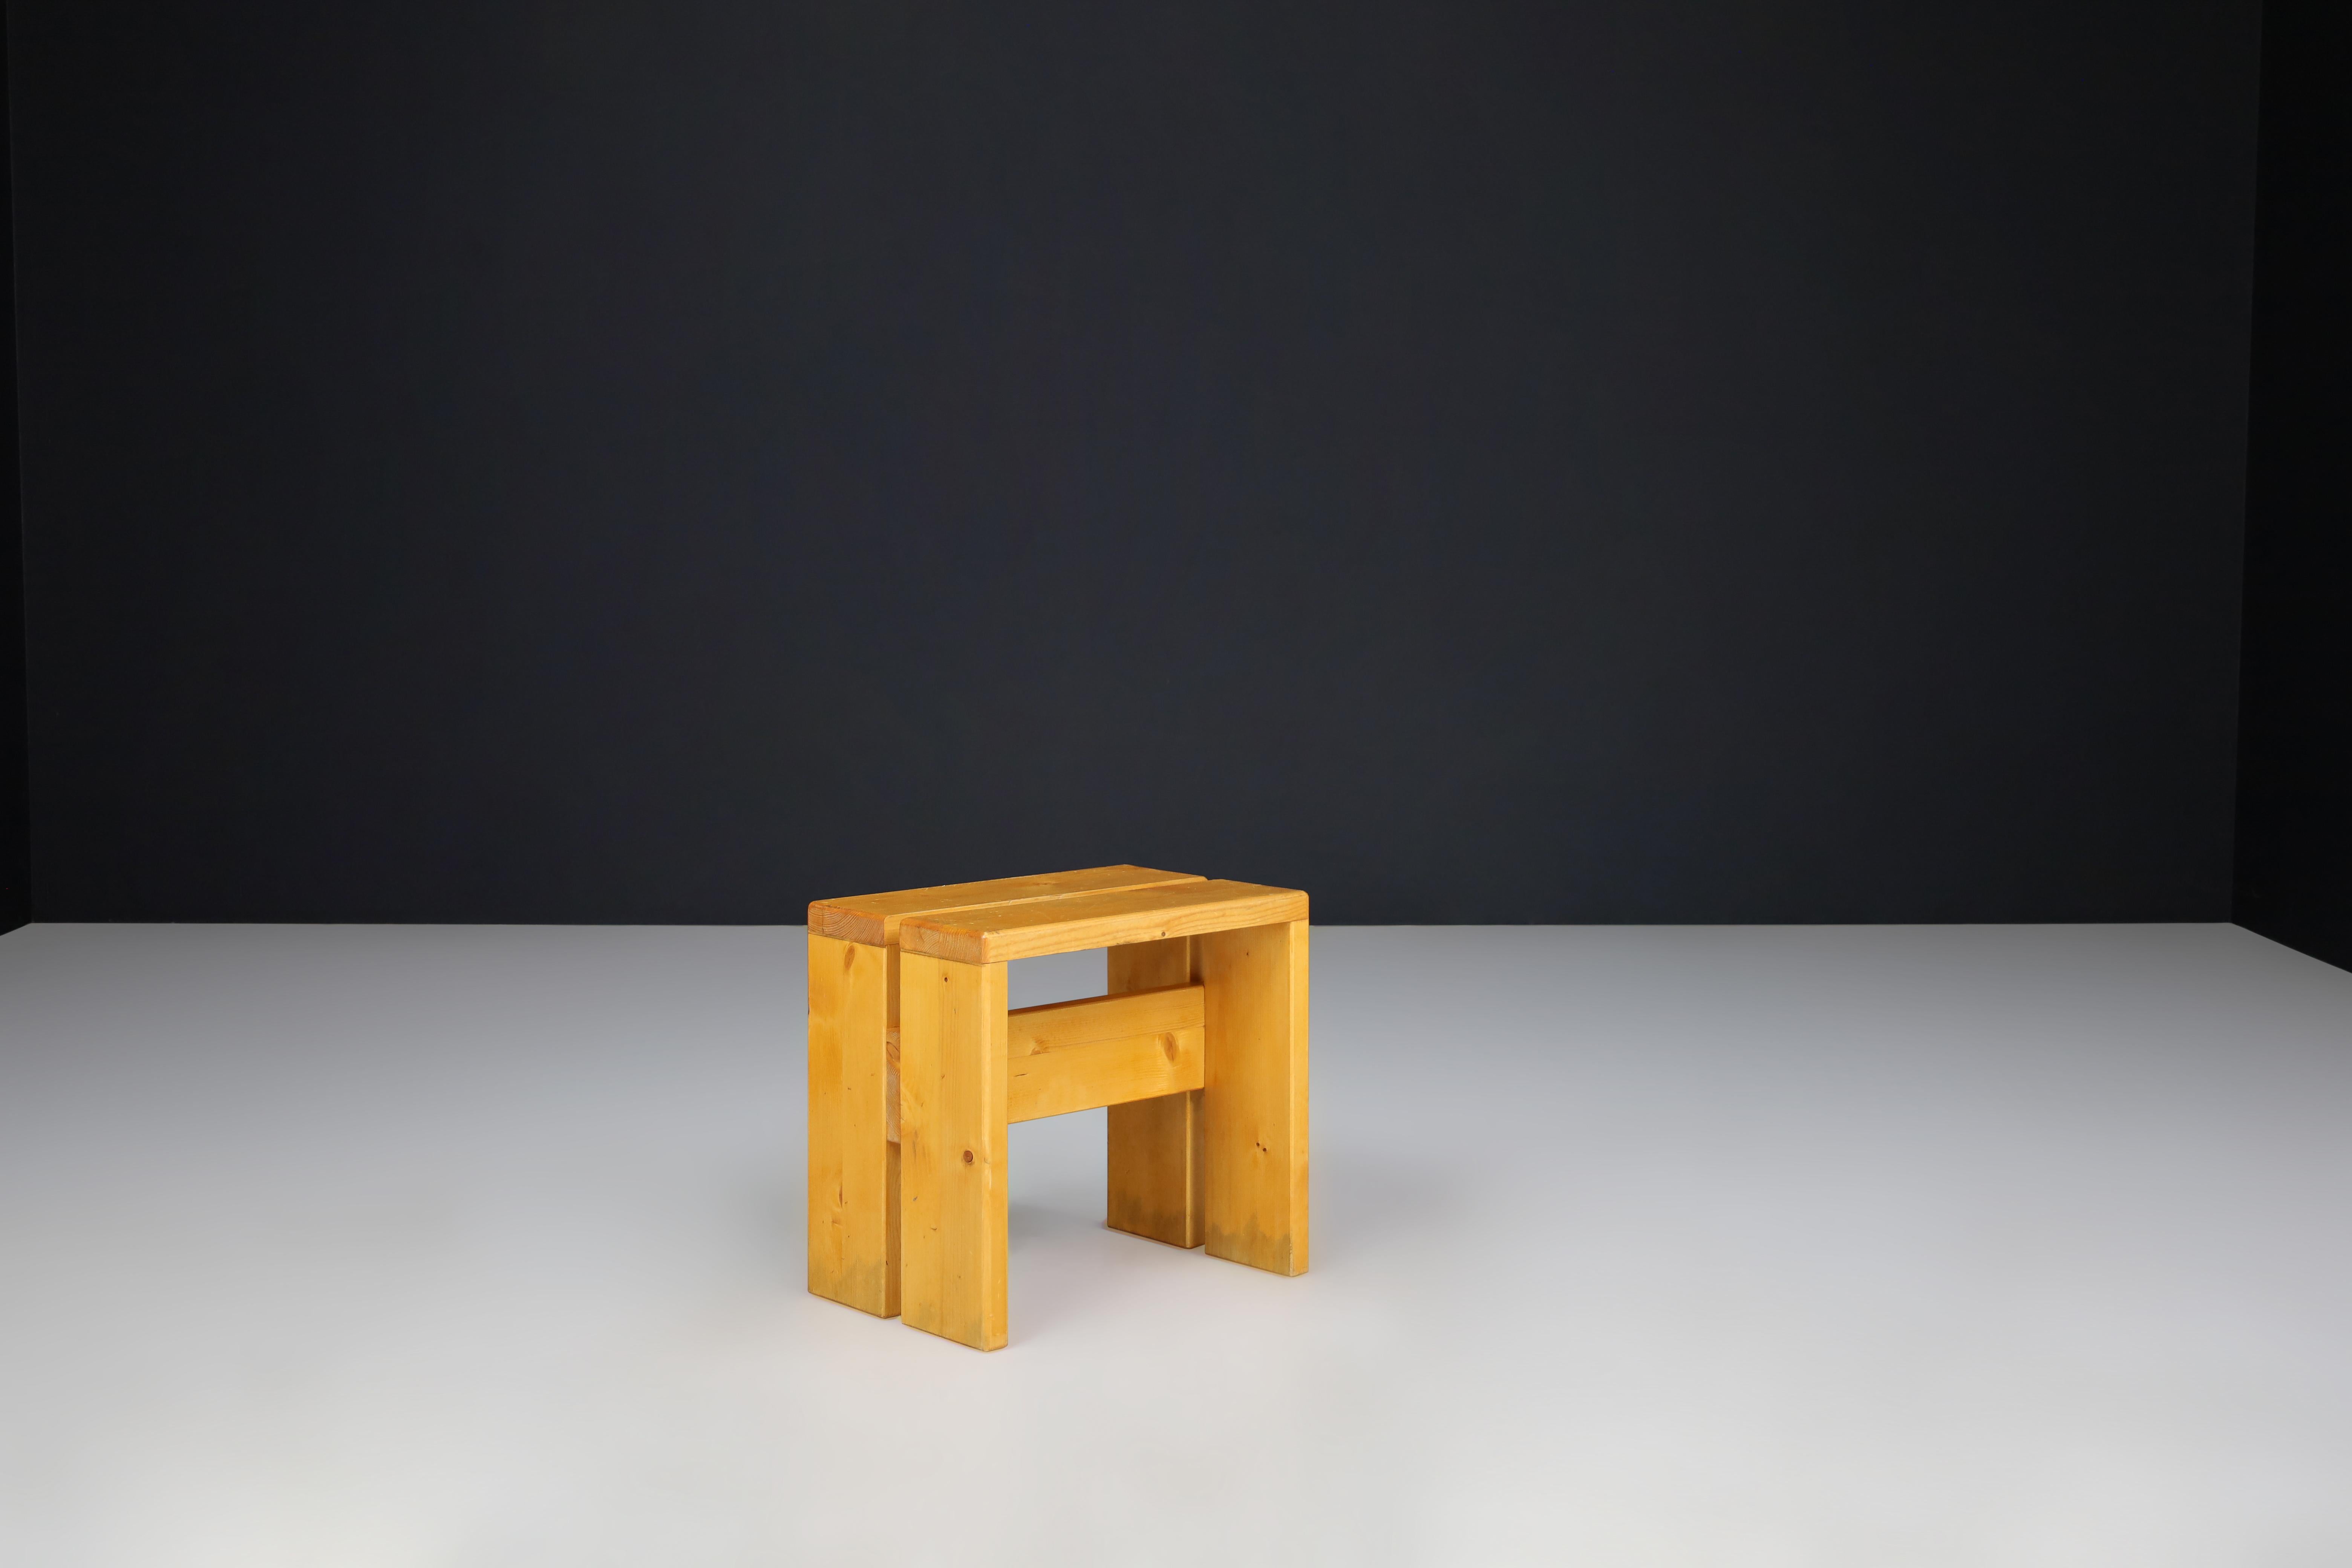 French Pine Wood Charlotte Perriand Stool for Les Arcs, France, 1960s For Sale